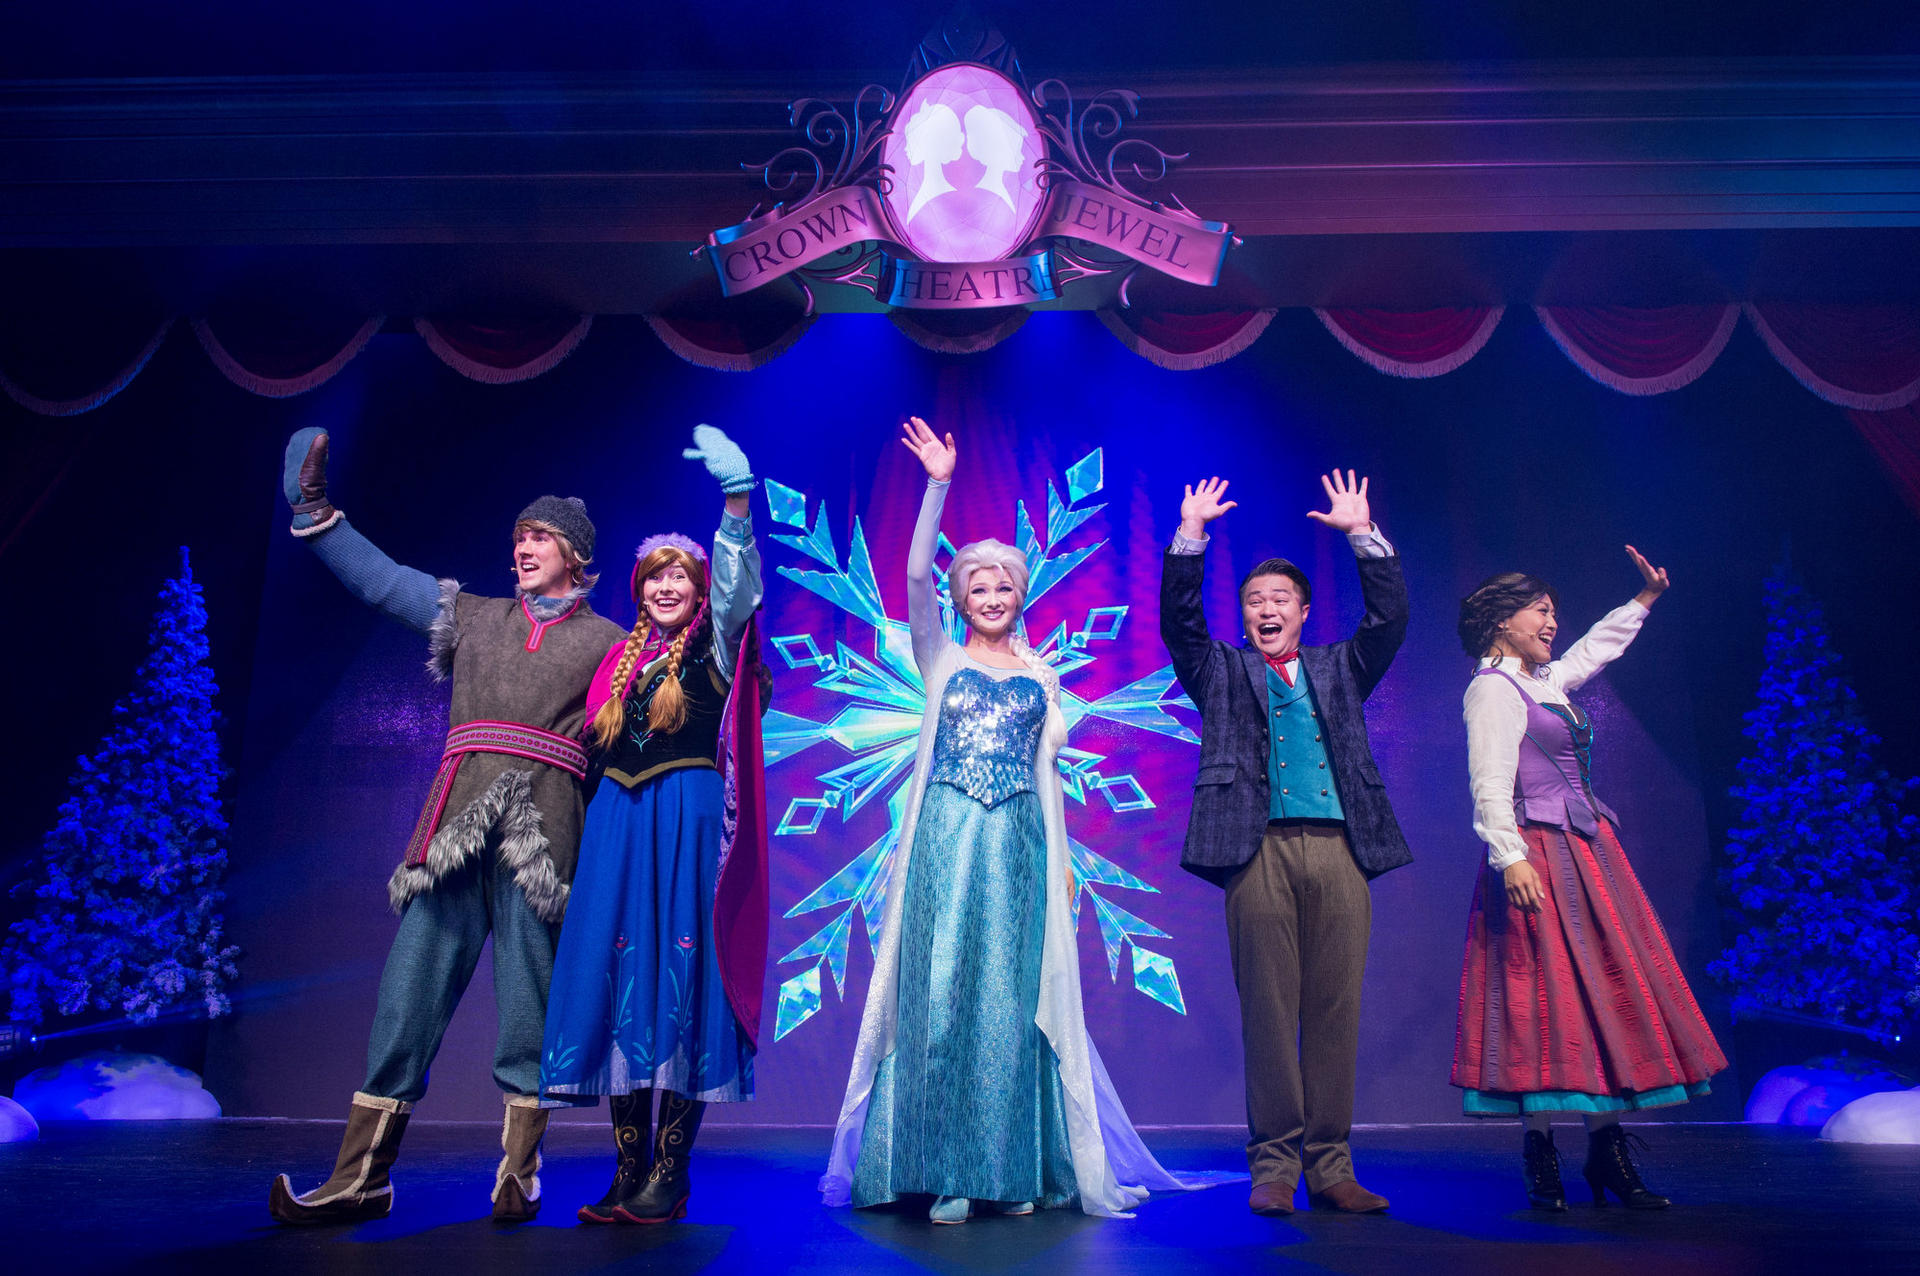 The festival show at Hong Kong Disneyland currently features characters from Frozen